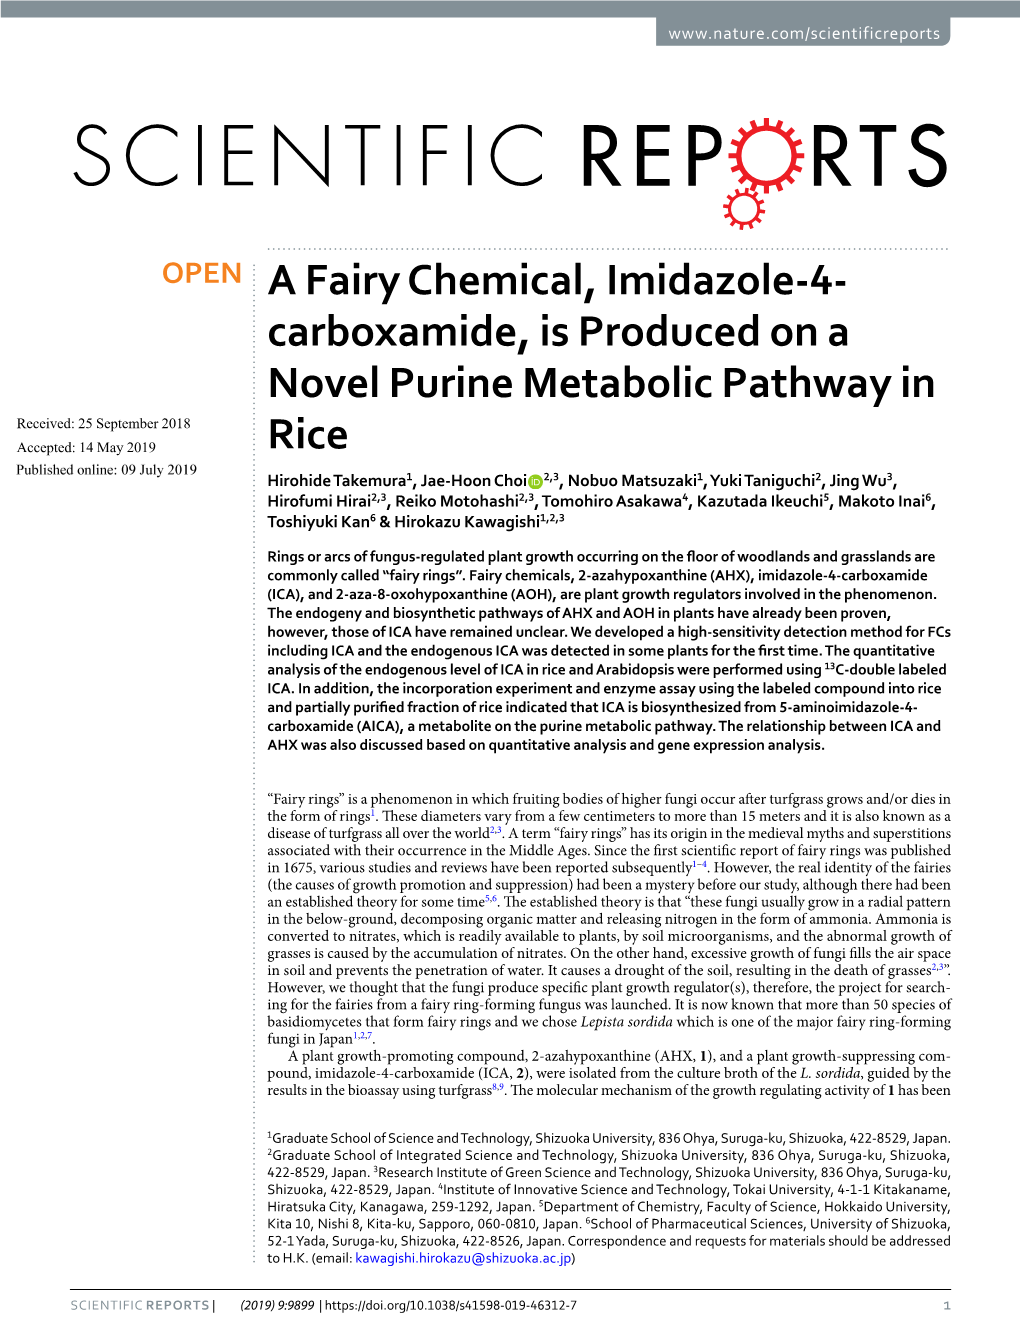 A Fairy Chemical, Imidazole-4-Carboxamide, Is